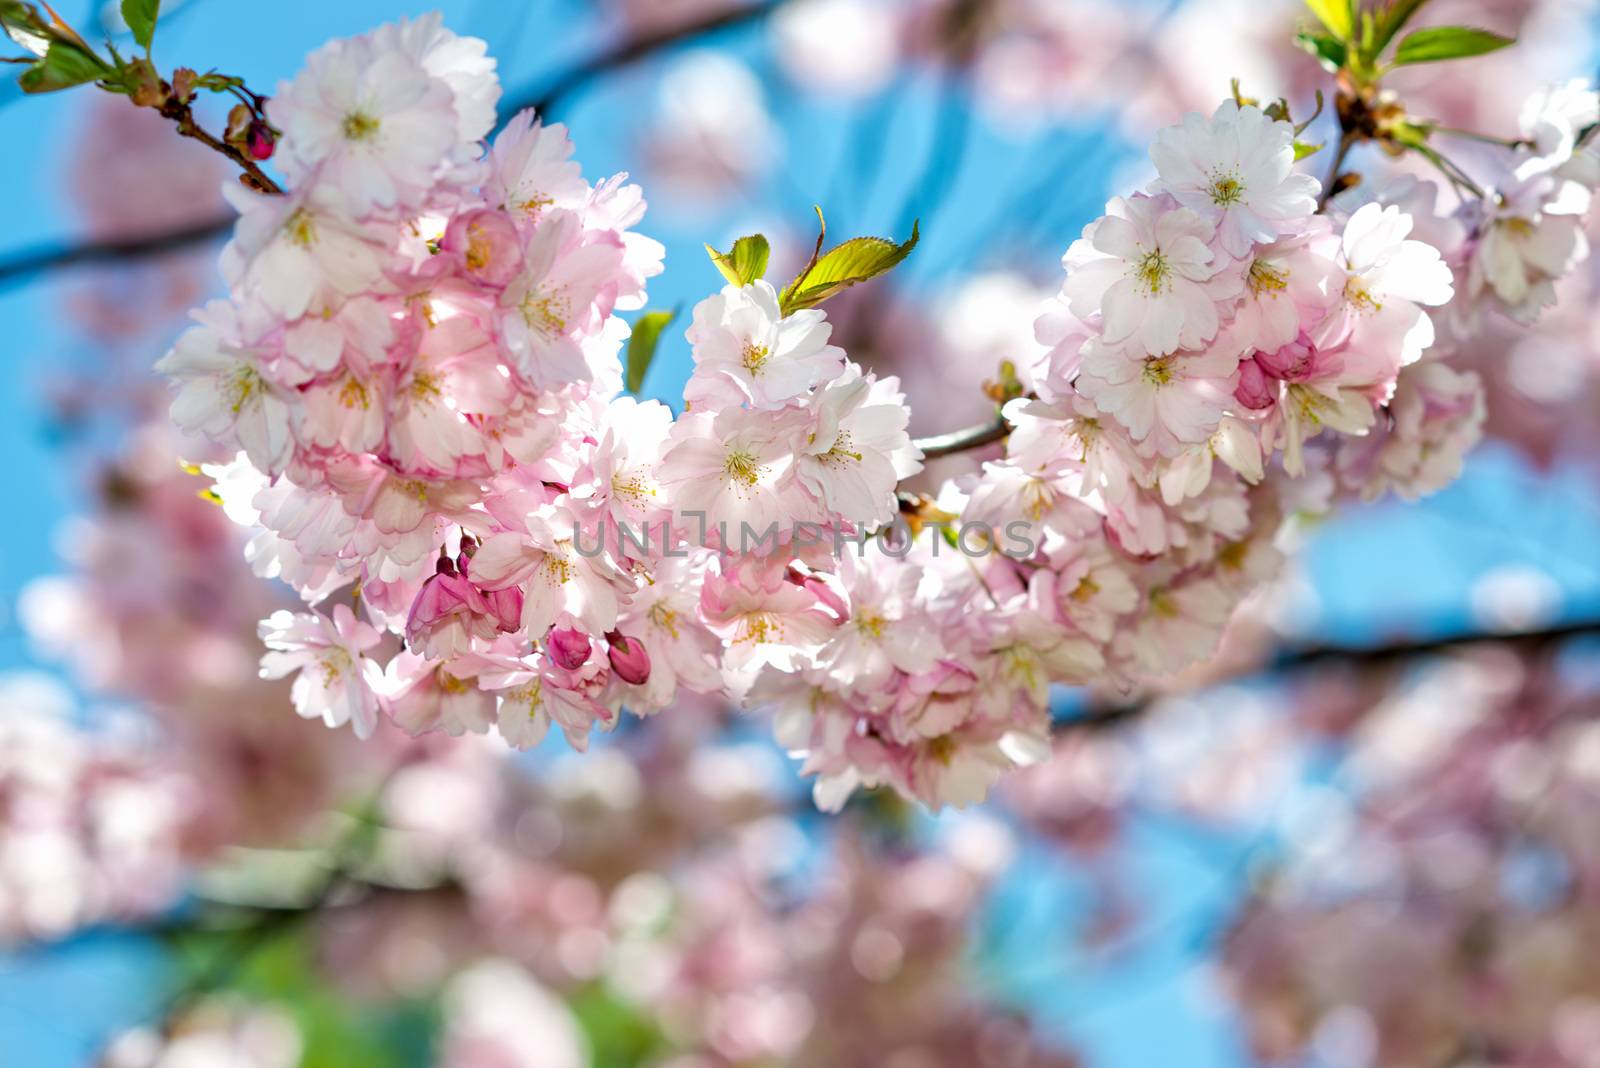 Selective focus close-up photography. Beautiful cherry blossom sakura in spring time over blue sky.